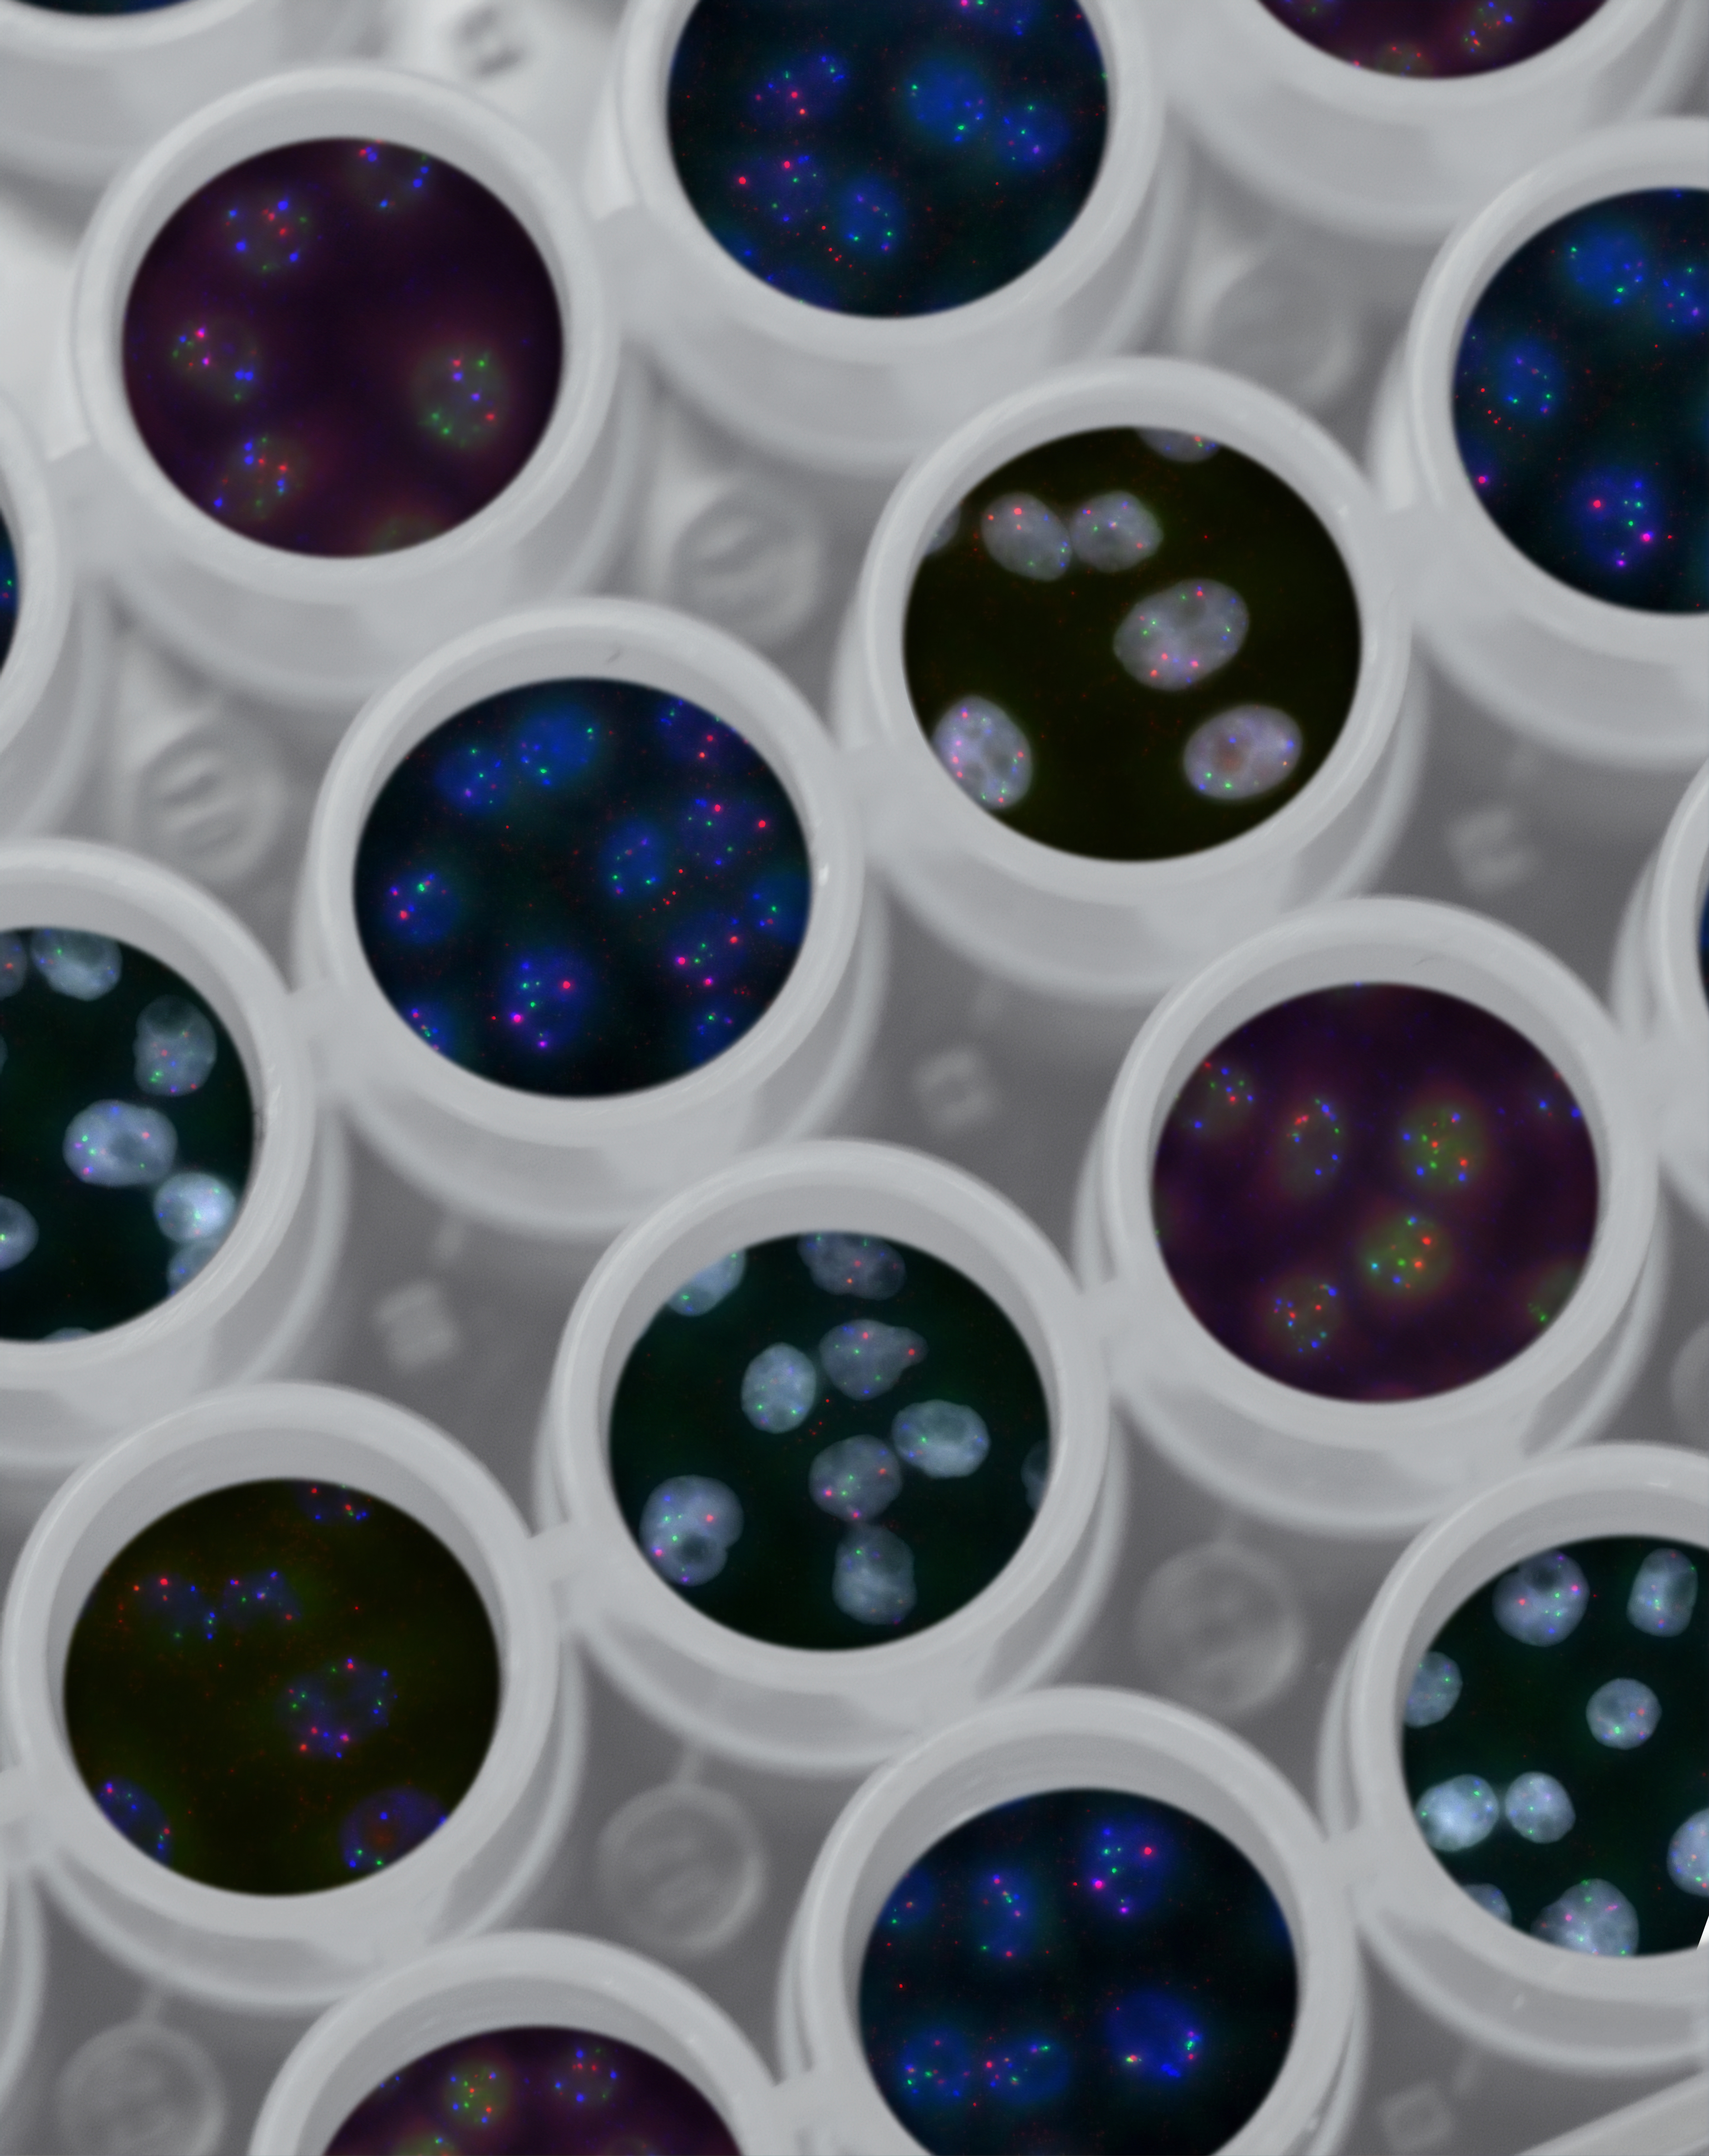 Illustration of images of genes (red, green and blue spots) are superimposed on images of multi-well plates